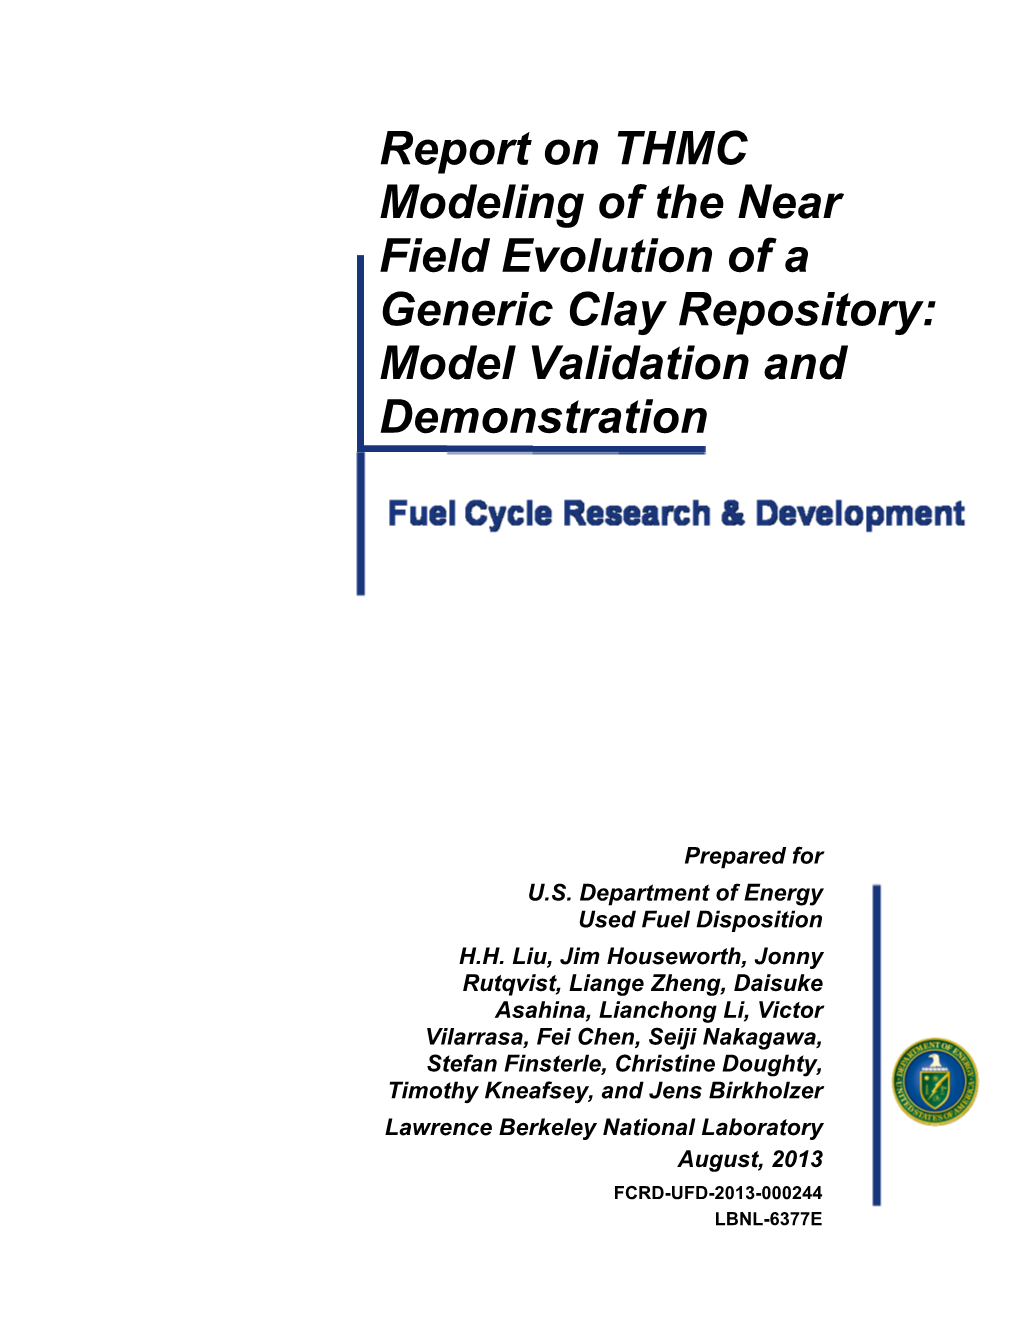 Report on THMC Modeling of the Near Field Evolution of a Generic Clay Repository: Model Validation and Demonstration